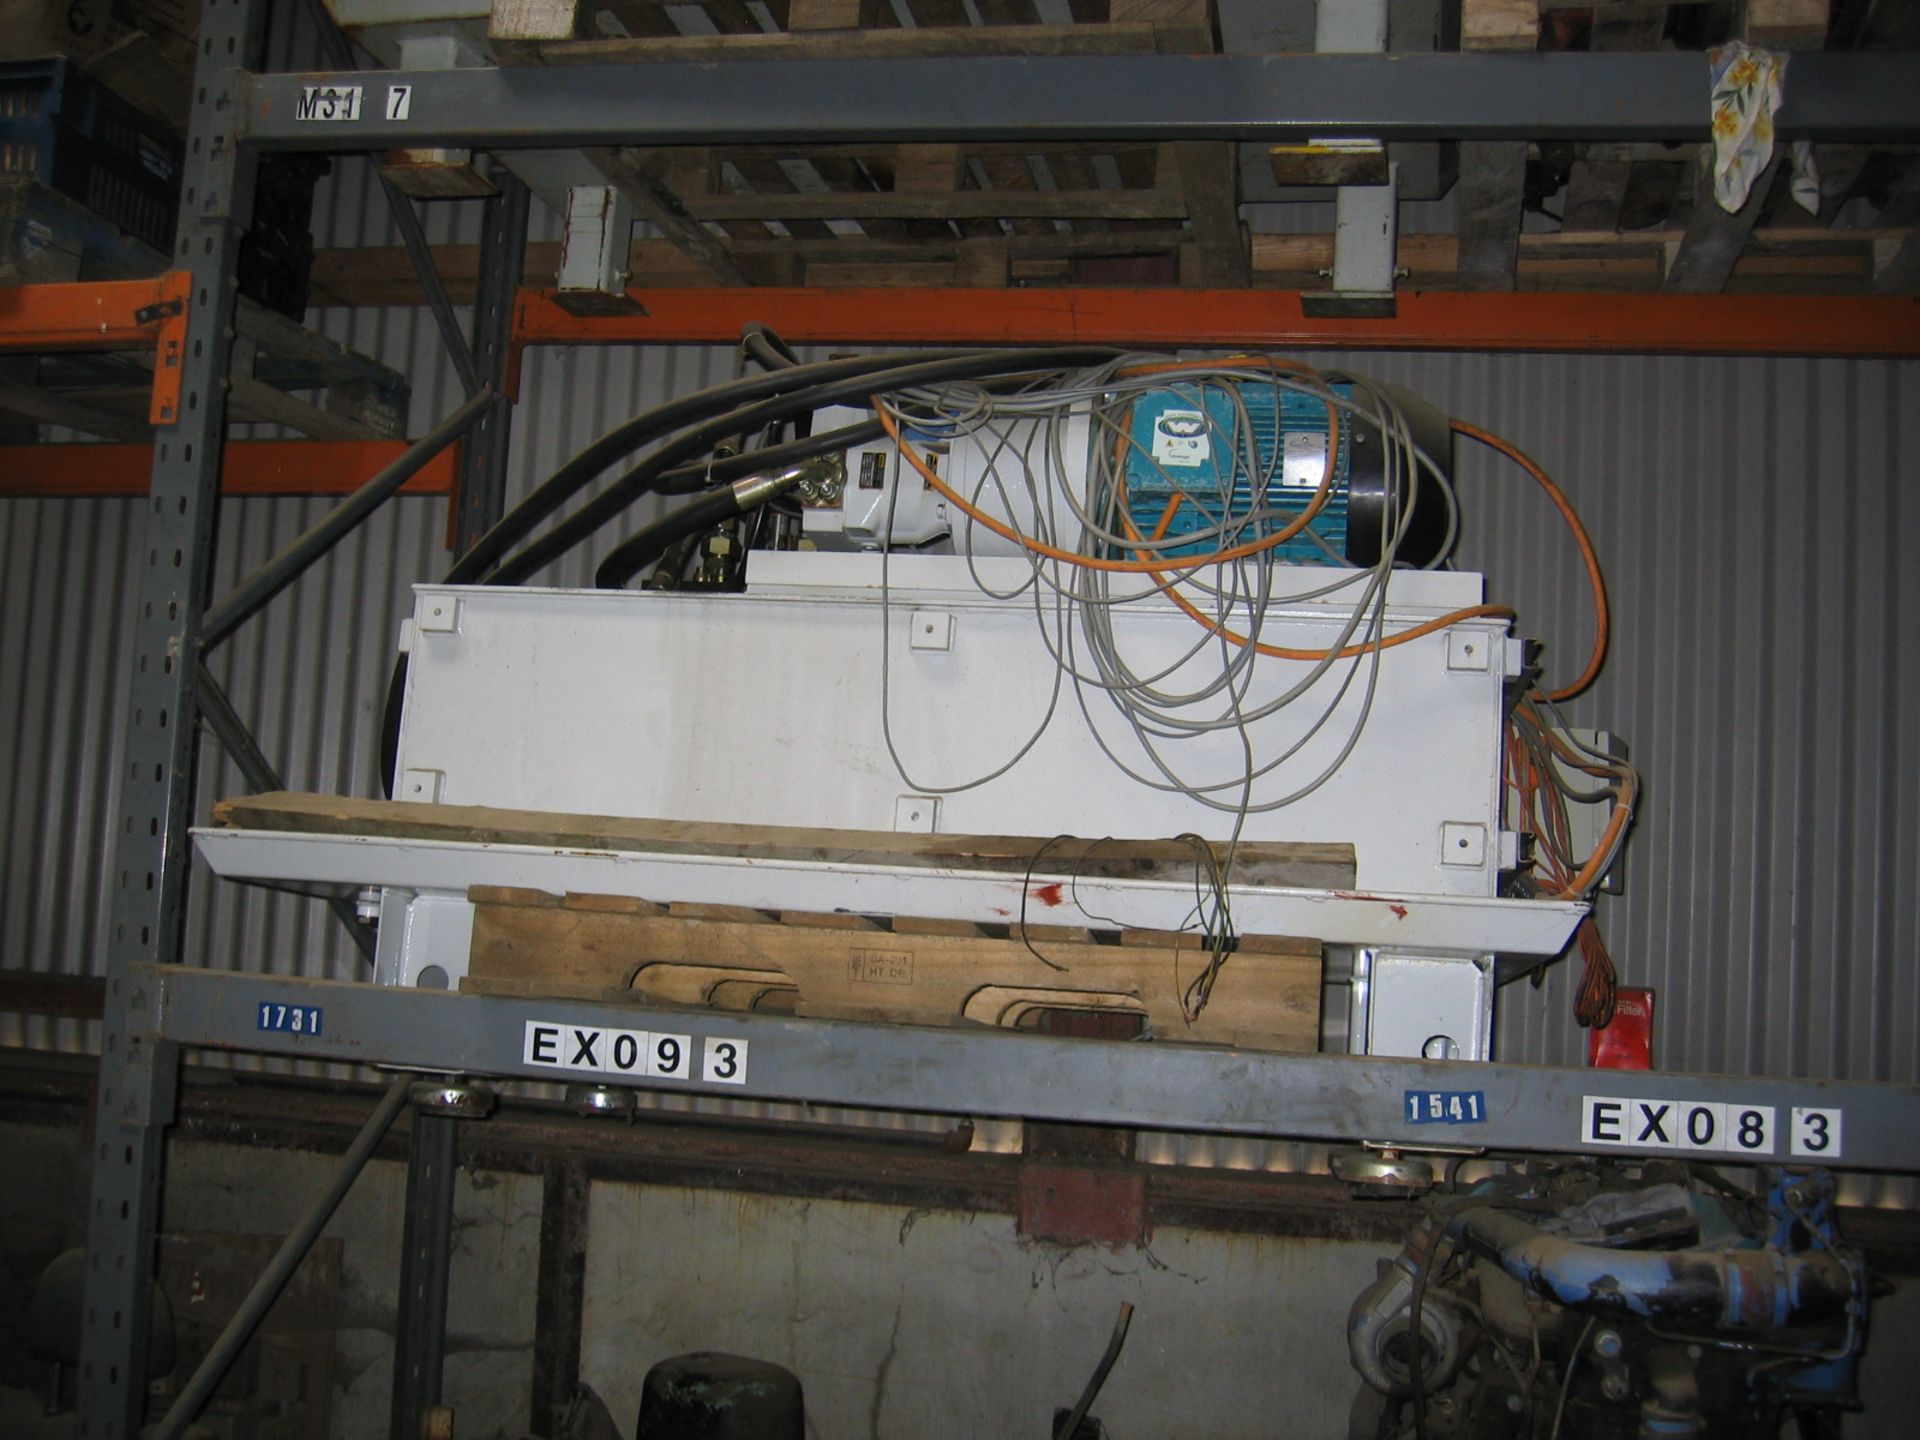 Hydraulic Powerpack - Vickers Hydraulic Powerpack, with 7.5kW pump. Done little work. The pump is